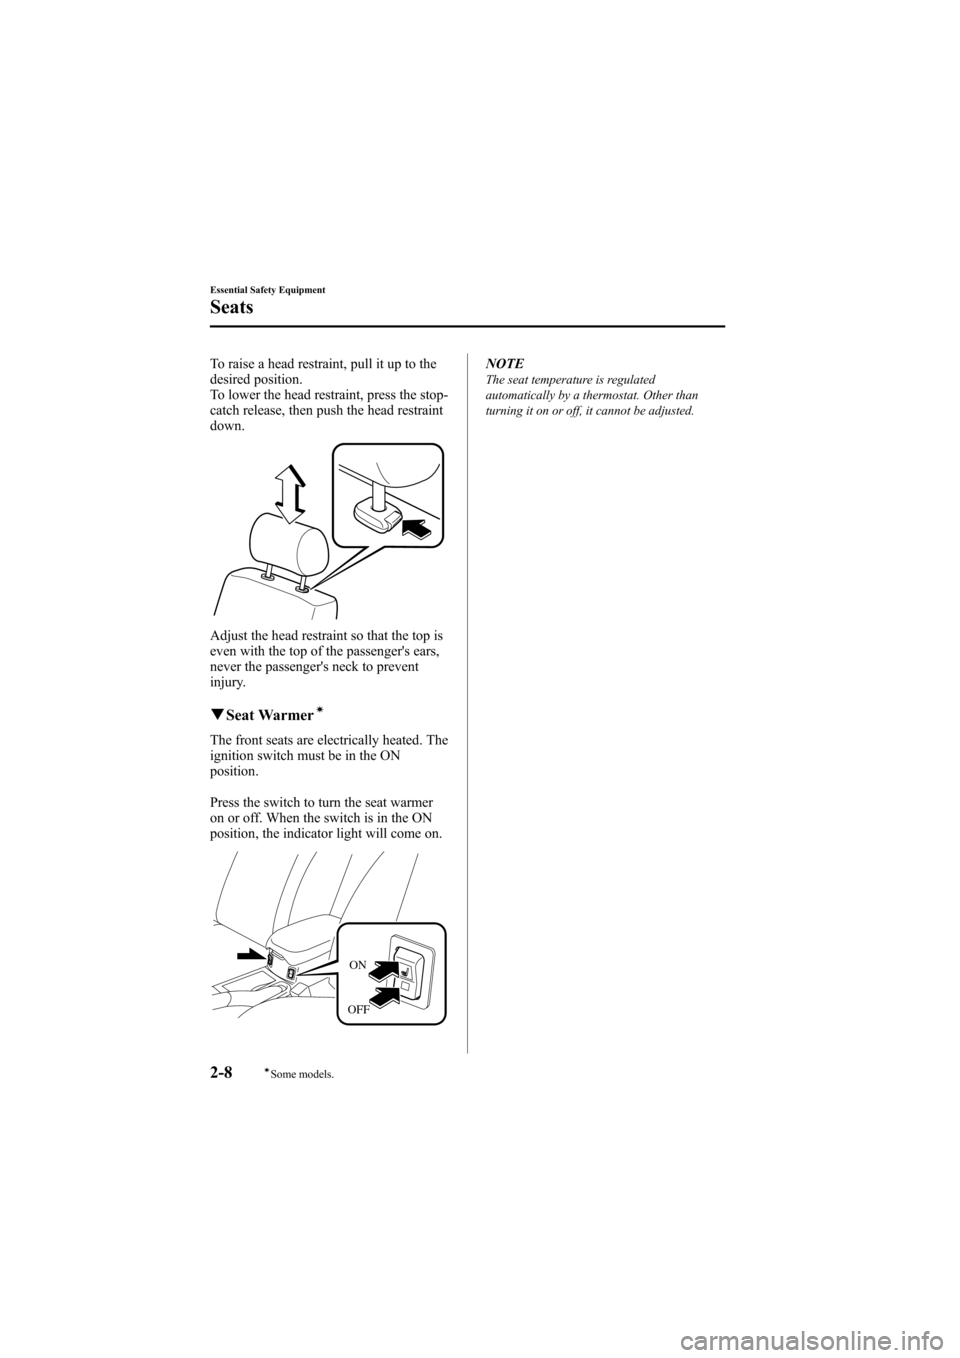 MAZDA MODEL 6 2008   (in English) Owners Manual Black plate (22,1)
To raise a head restraint, pull it up to the
desired position.
To lower the head restraint, press the stop-
catch release, then push the head restraint
down.
Adjust the head restrai